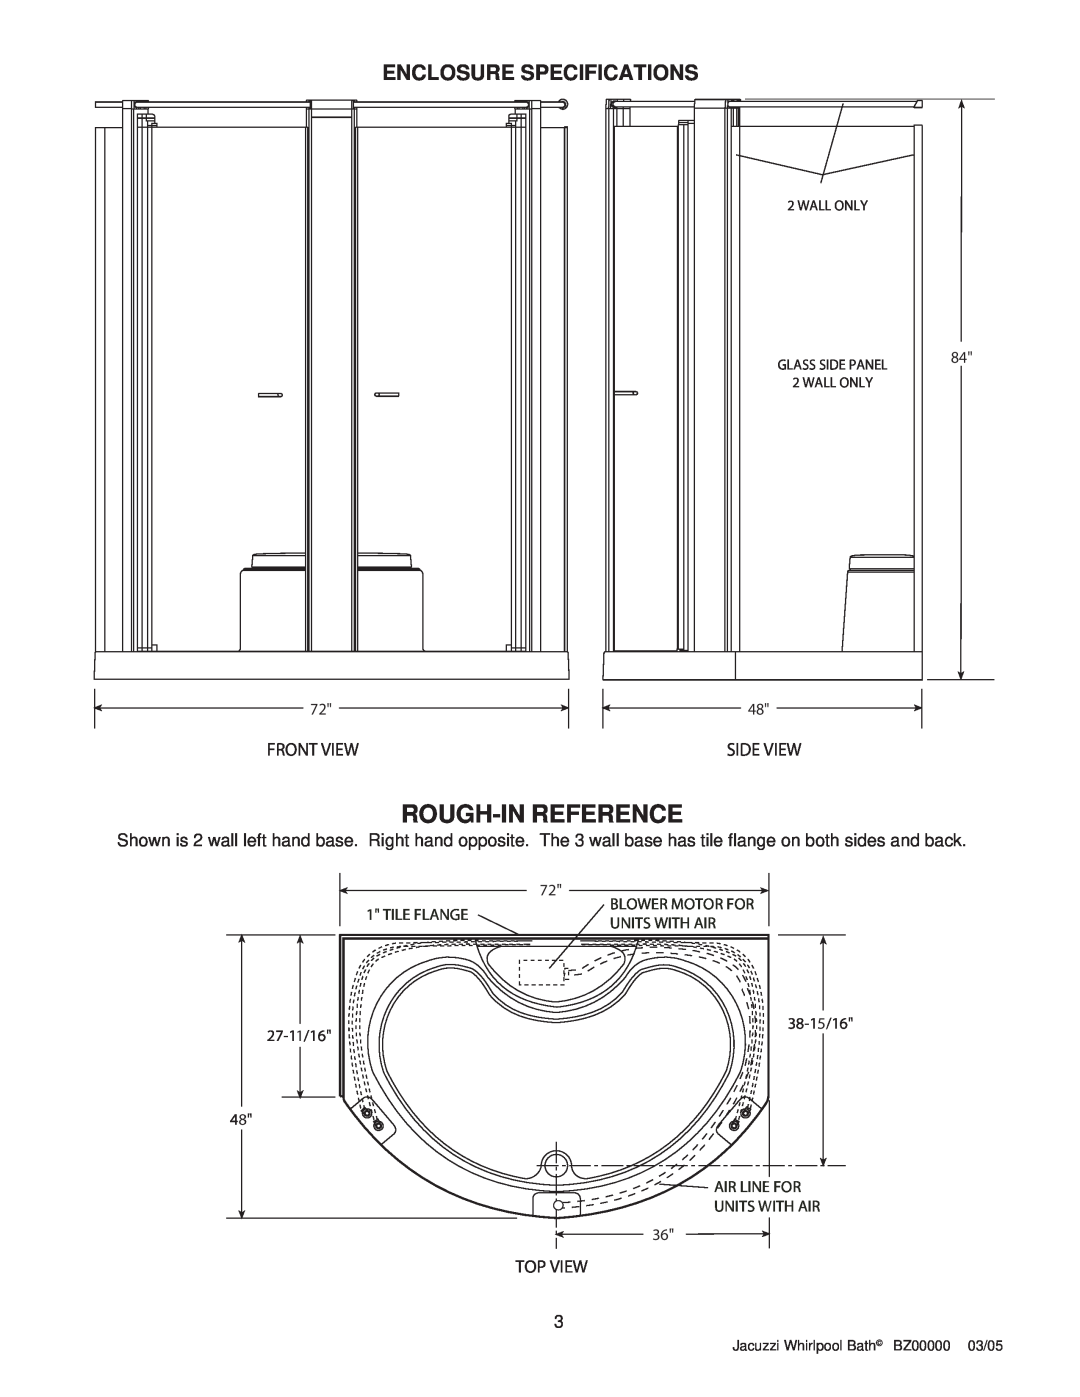 Jacuzzi BZ00000 Rough-In Reference, Enclosure Specifications, Front View, Side View, Top View, Tile Flange, Units With Air 